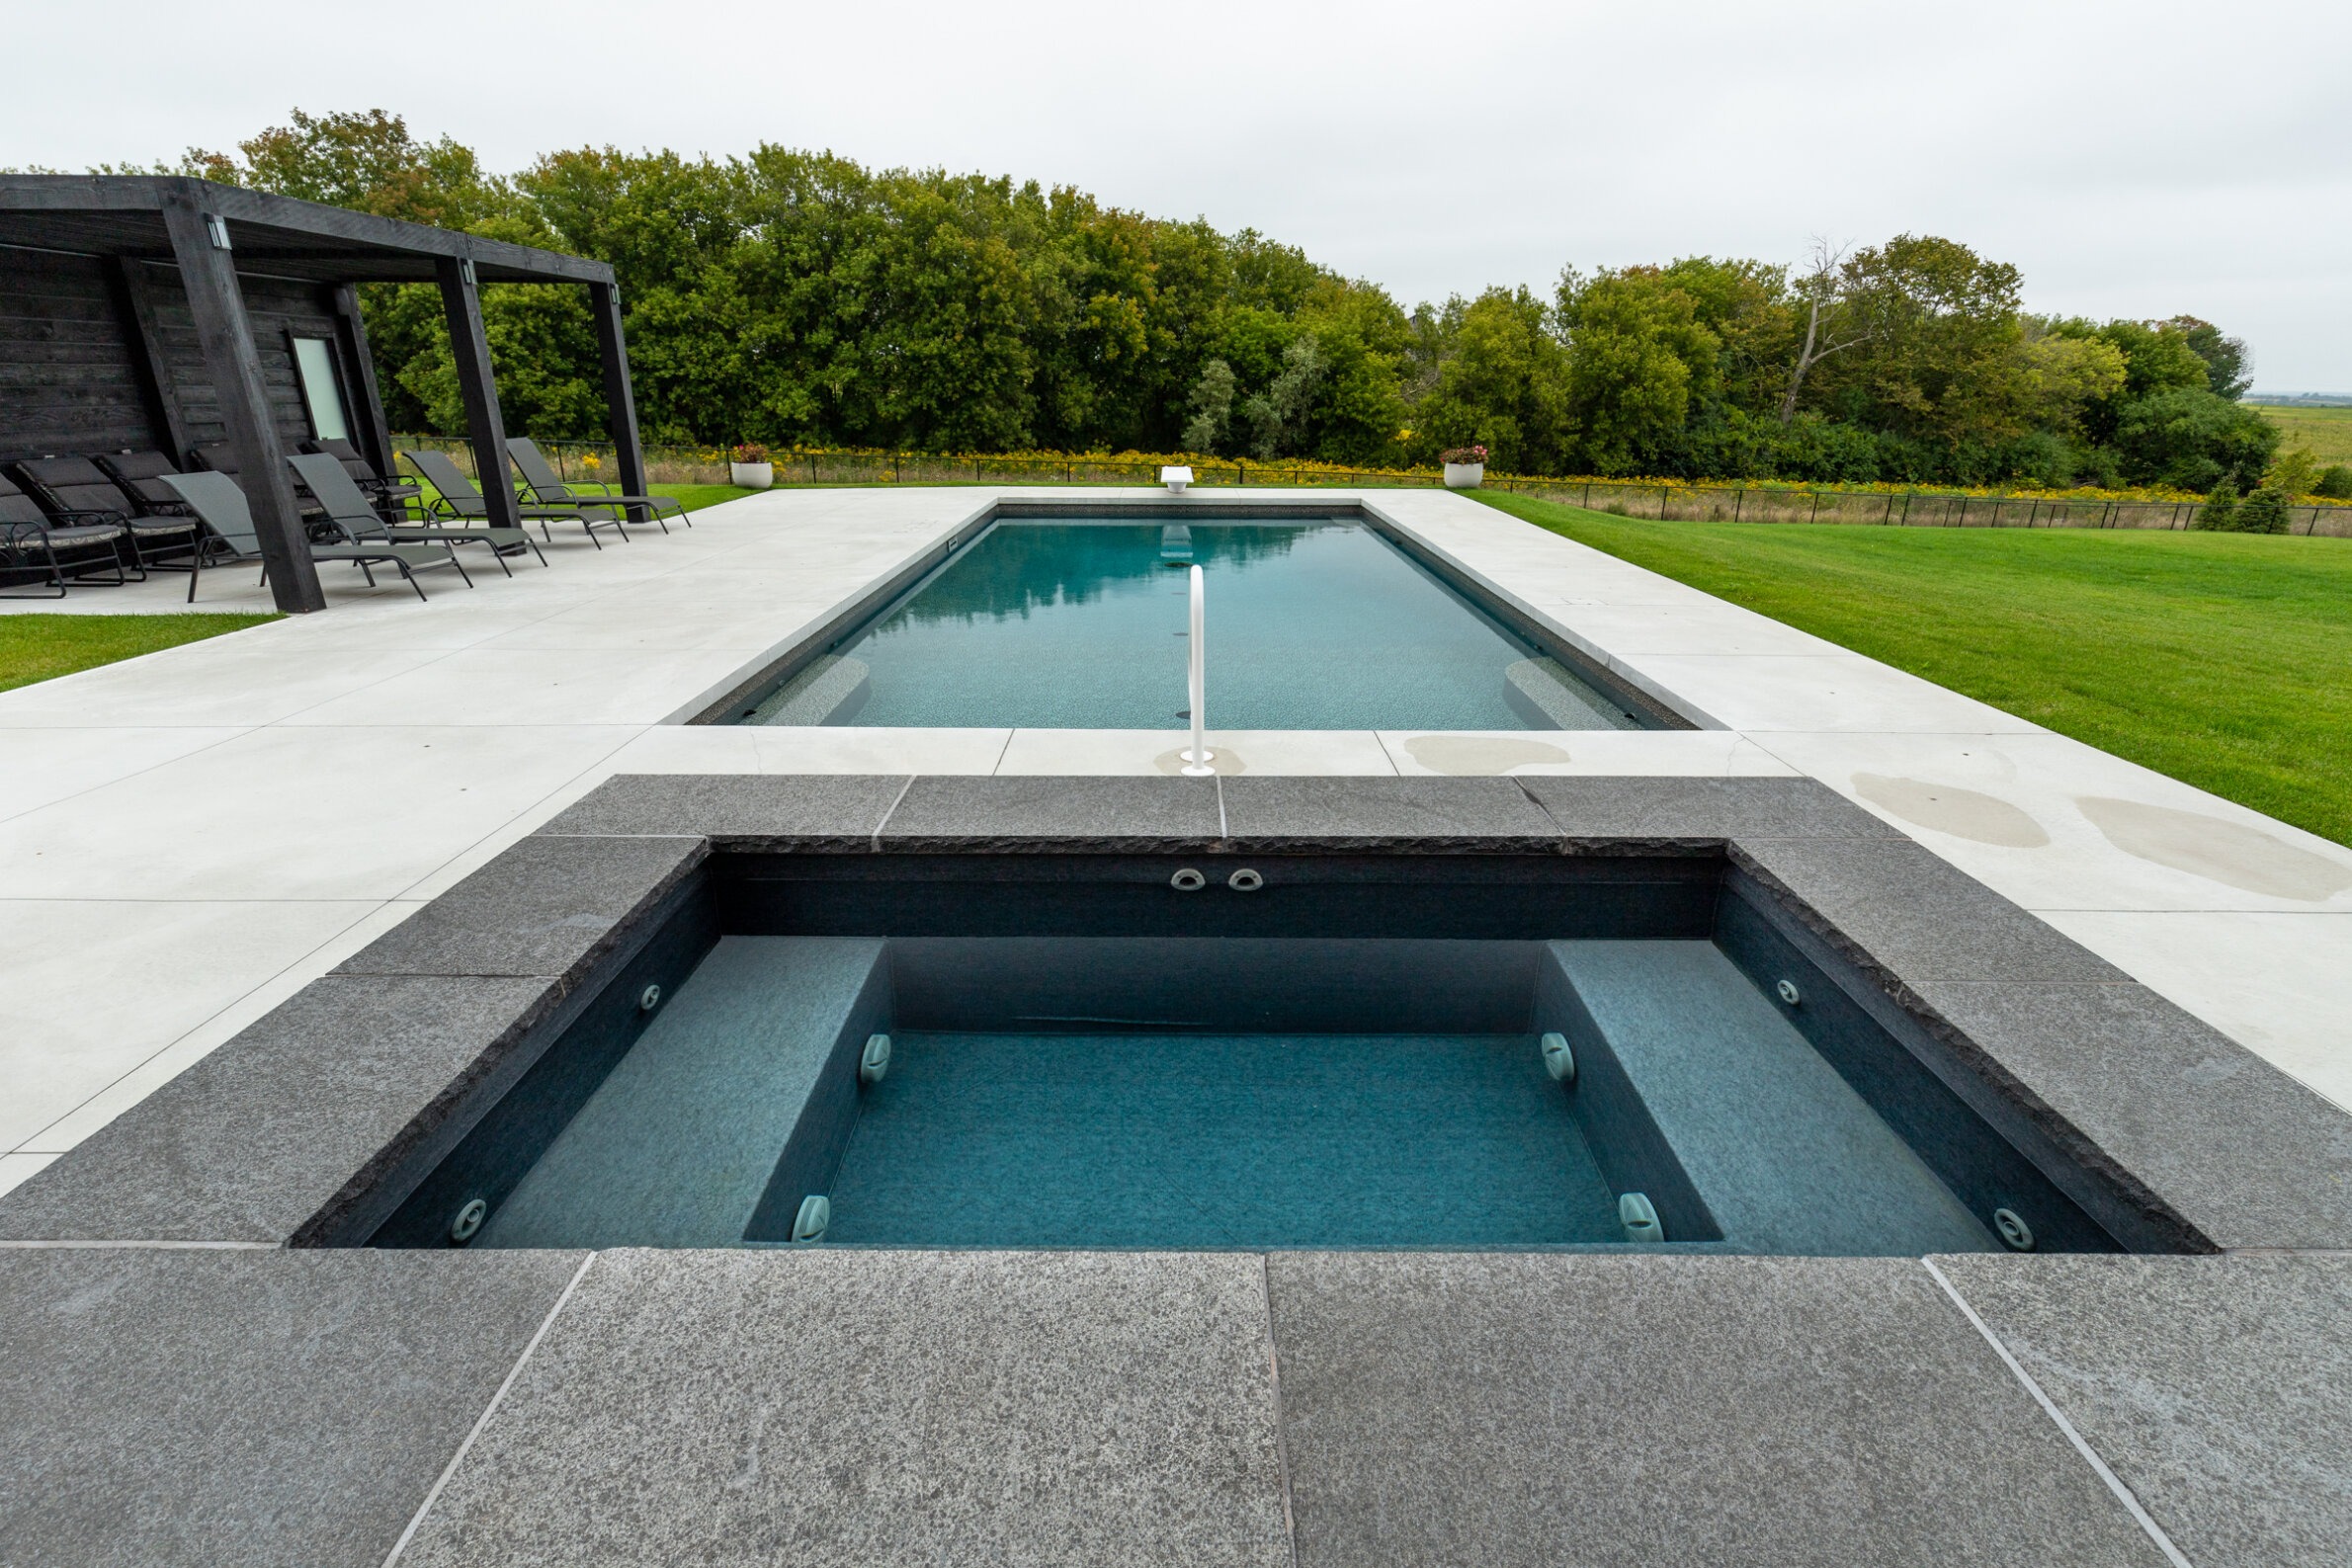 This image shows a modern outdoor pool and a hot tub with grey stone decking, lounging chairs to the side, and greenery in the background.